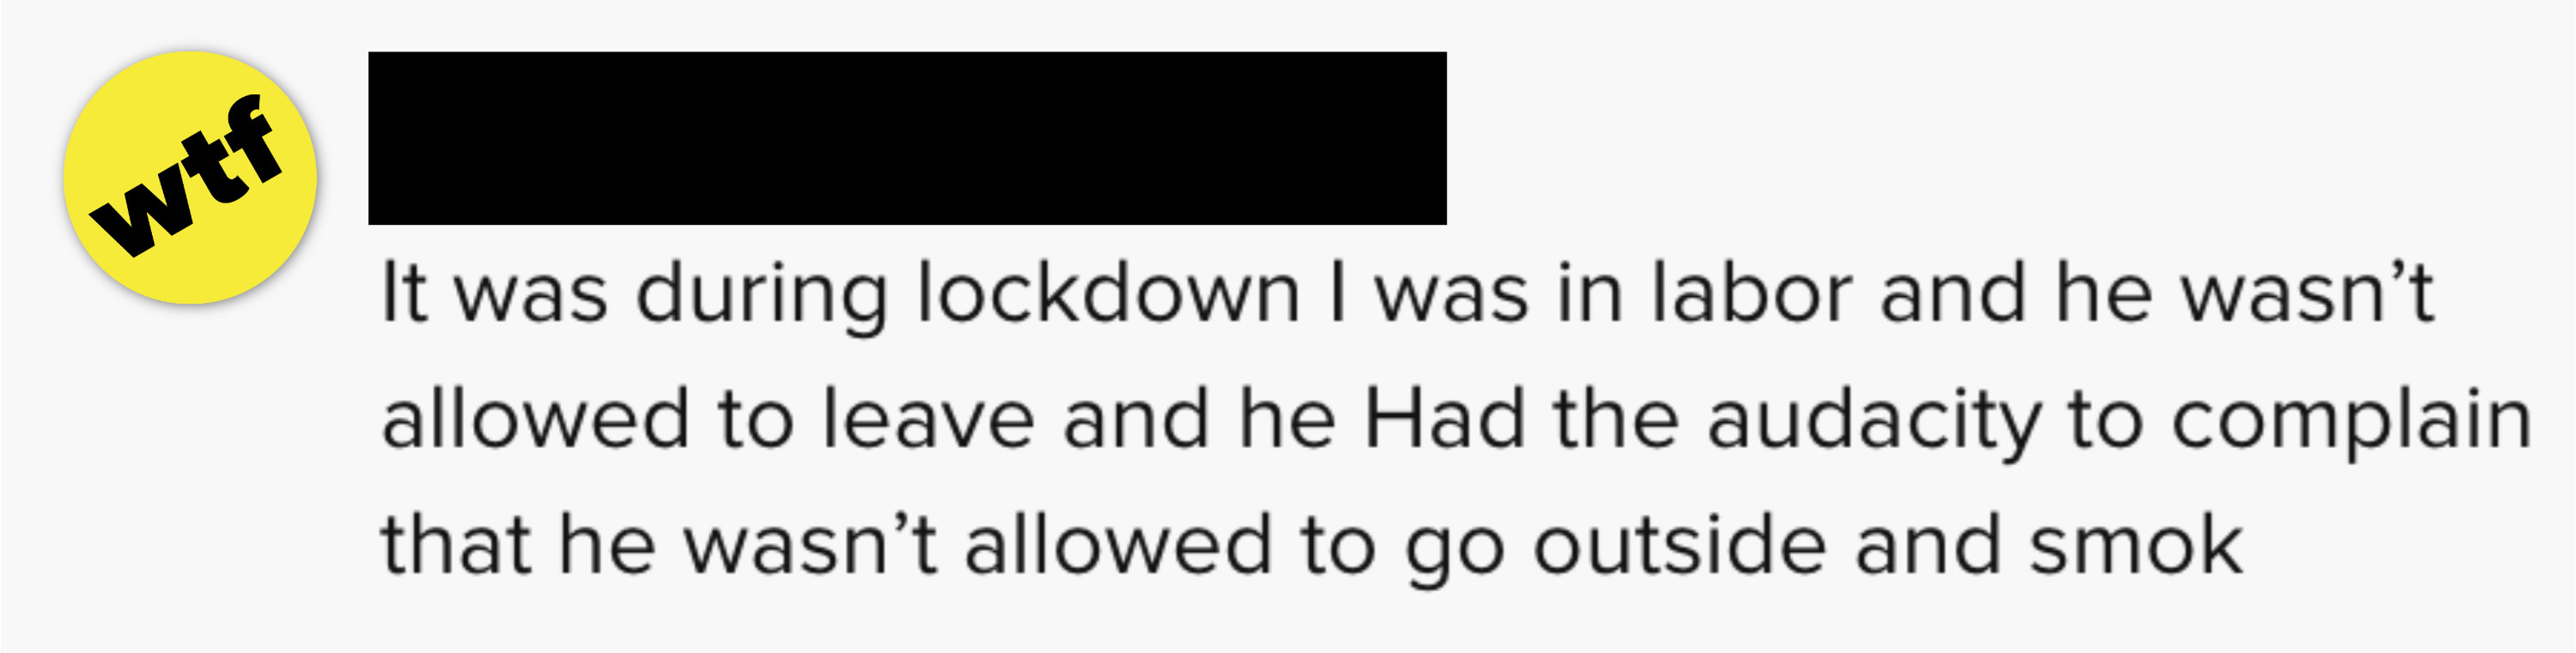 It was during lockdown, I was in labor and he wasn&#x27;t allowed to leave. He had the audacity to complain that he wasn&#x27;t allowed to go outside and smoke&quot;